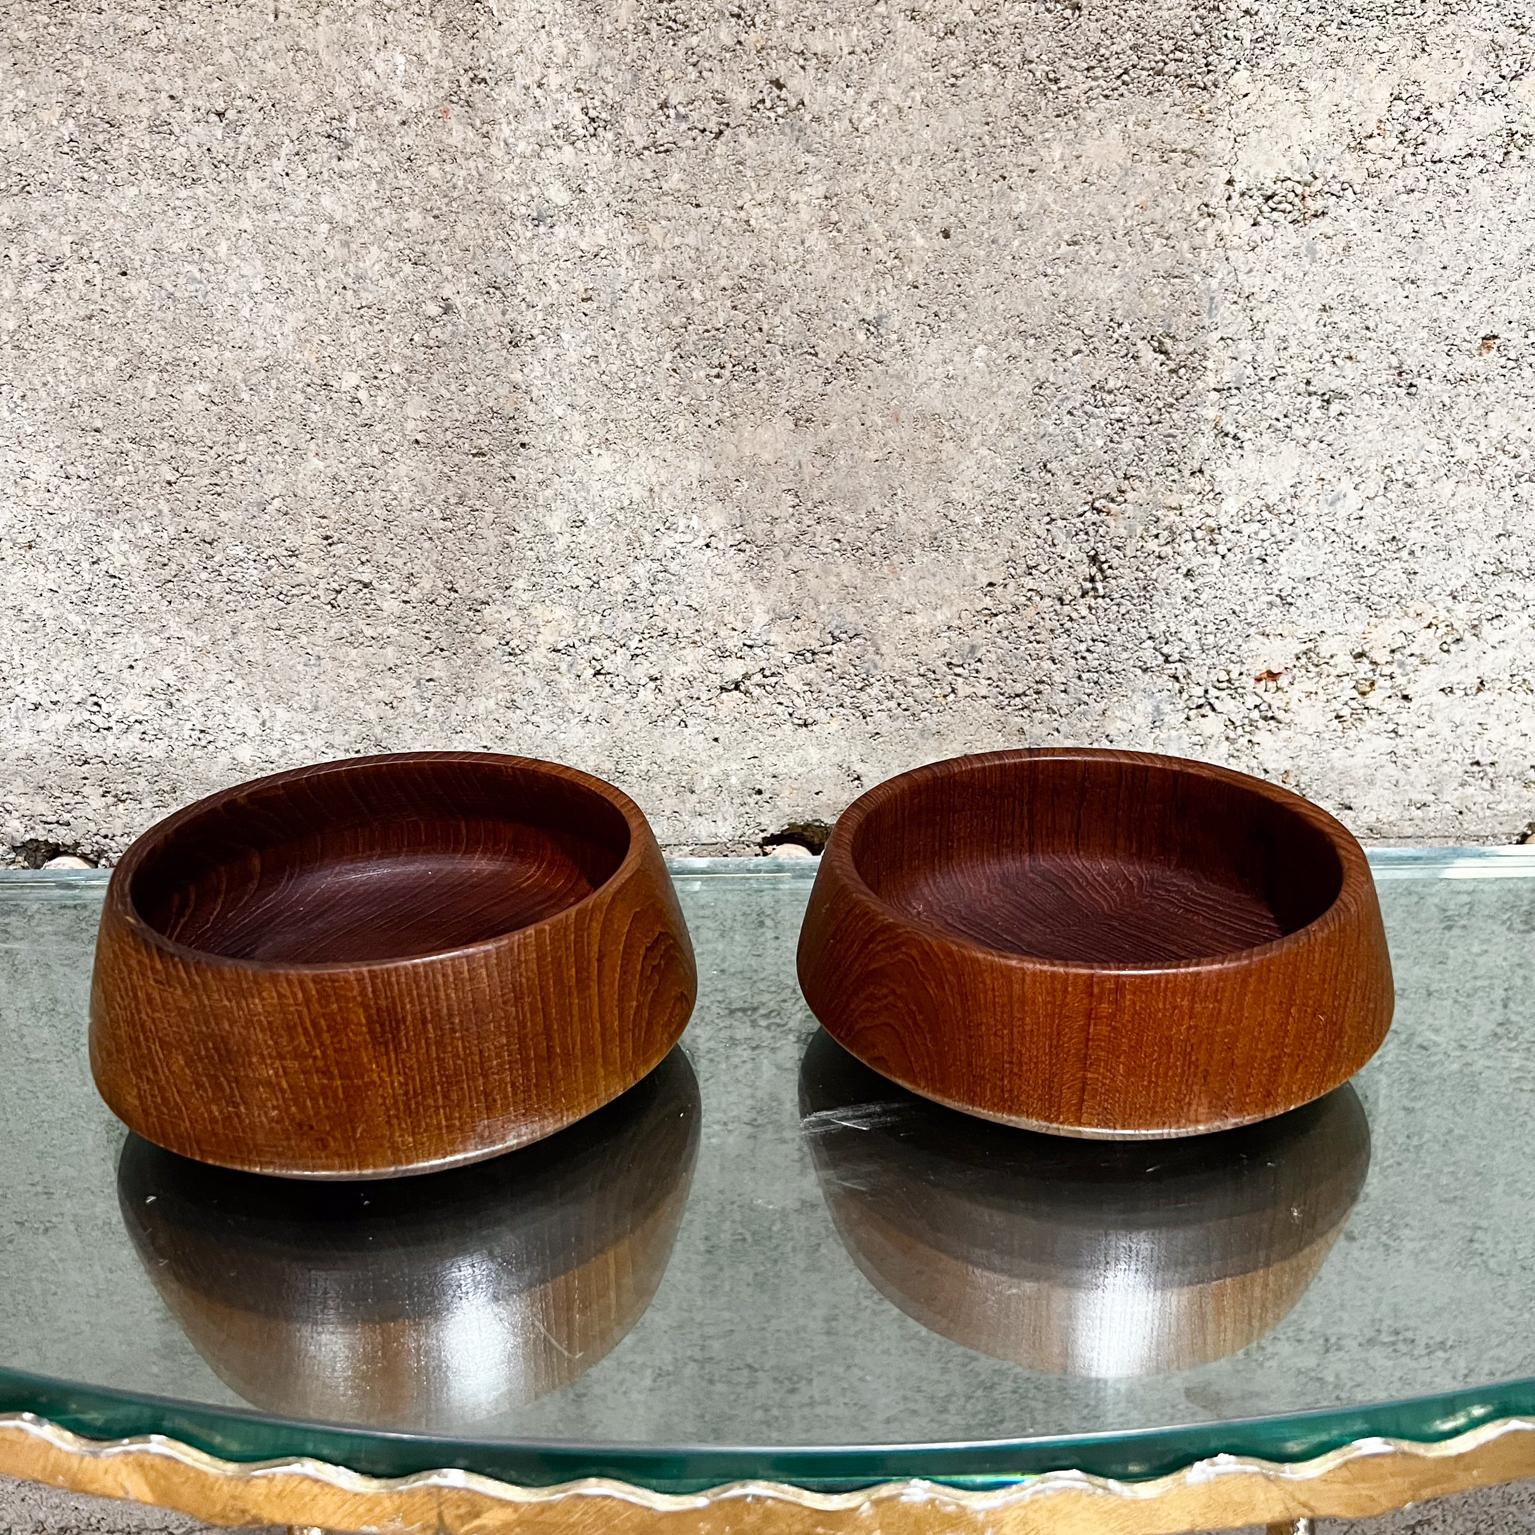 1960s Pair of Teak Wood Bowls after Dansk Designs Jens Quistgaard
6 diameter x 2.13 tall
Preowned original vintage condition
See images please.

